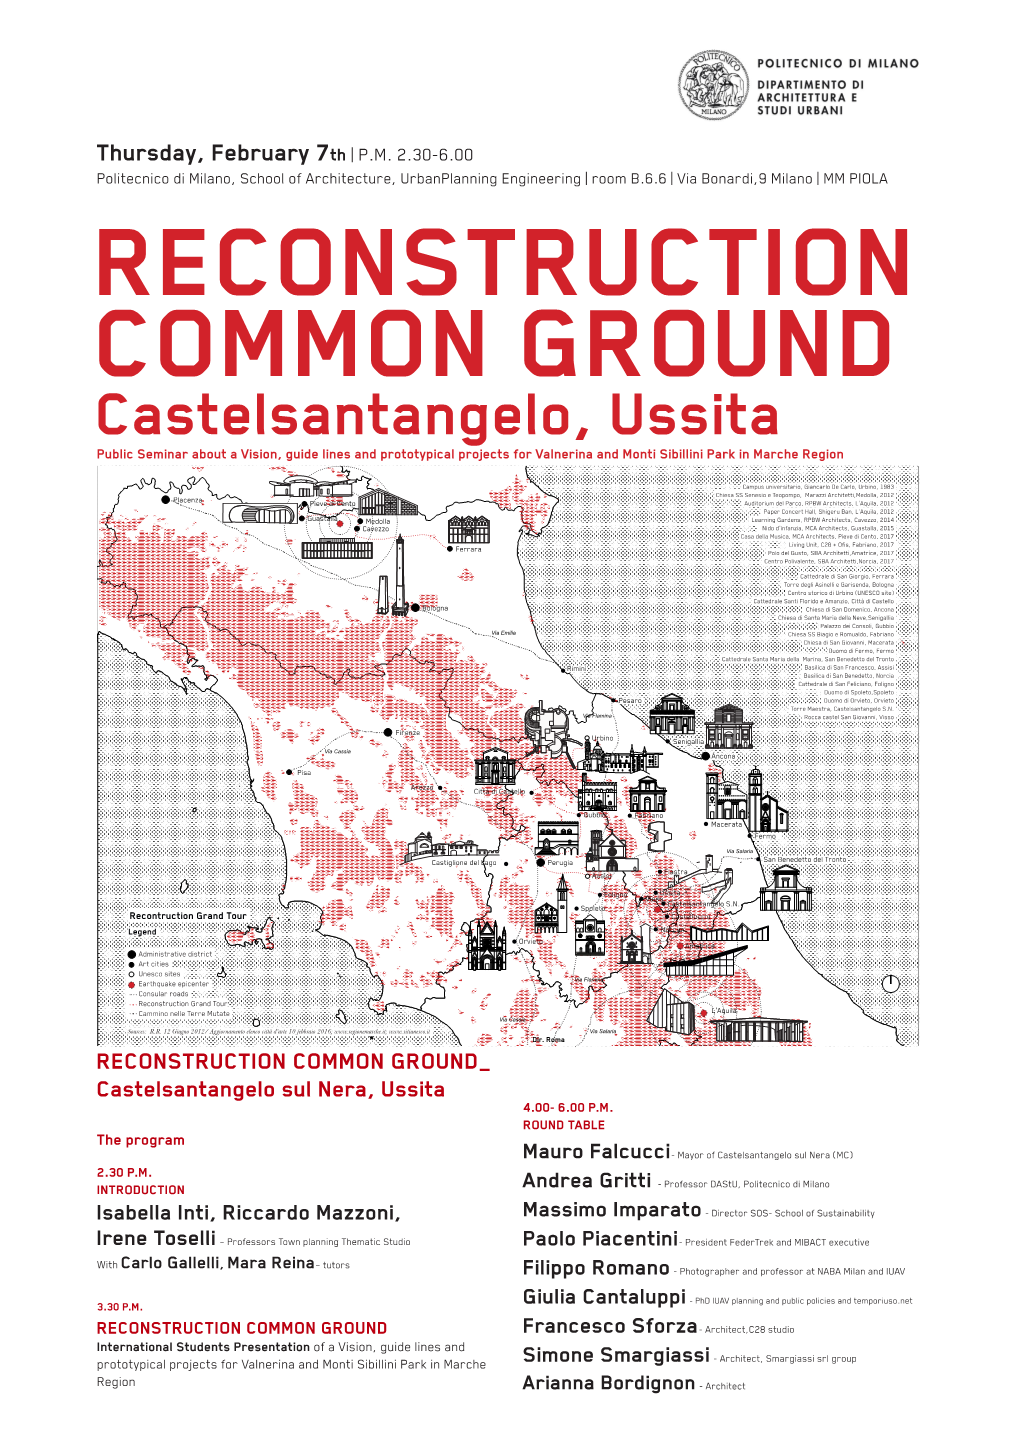 Castelsantangelo, Ussita Public Seminar About a Vision, Guide Lines and Prototypical Projects for Valnerina and Monti Sibillini Park in Marche Region